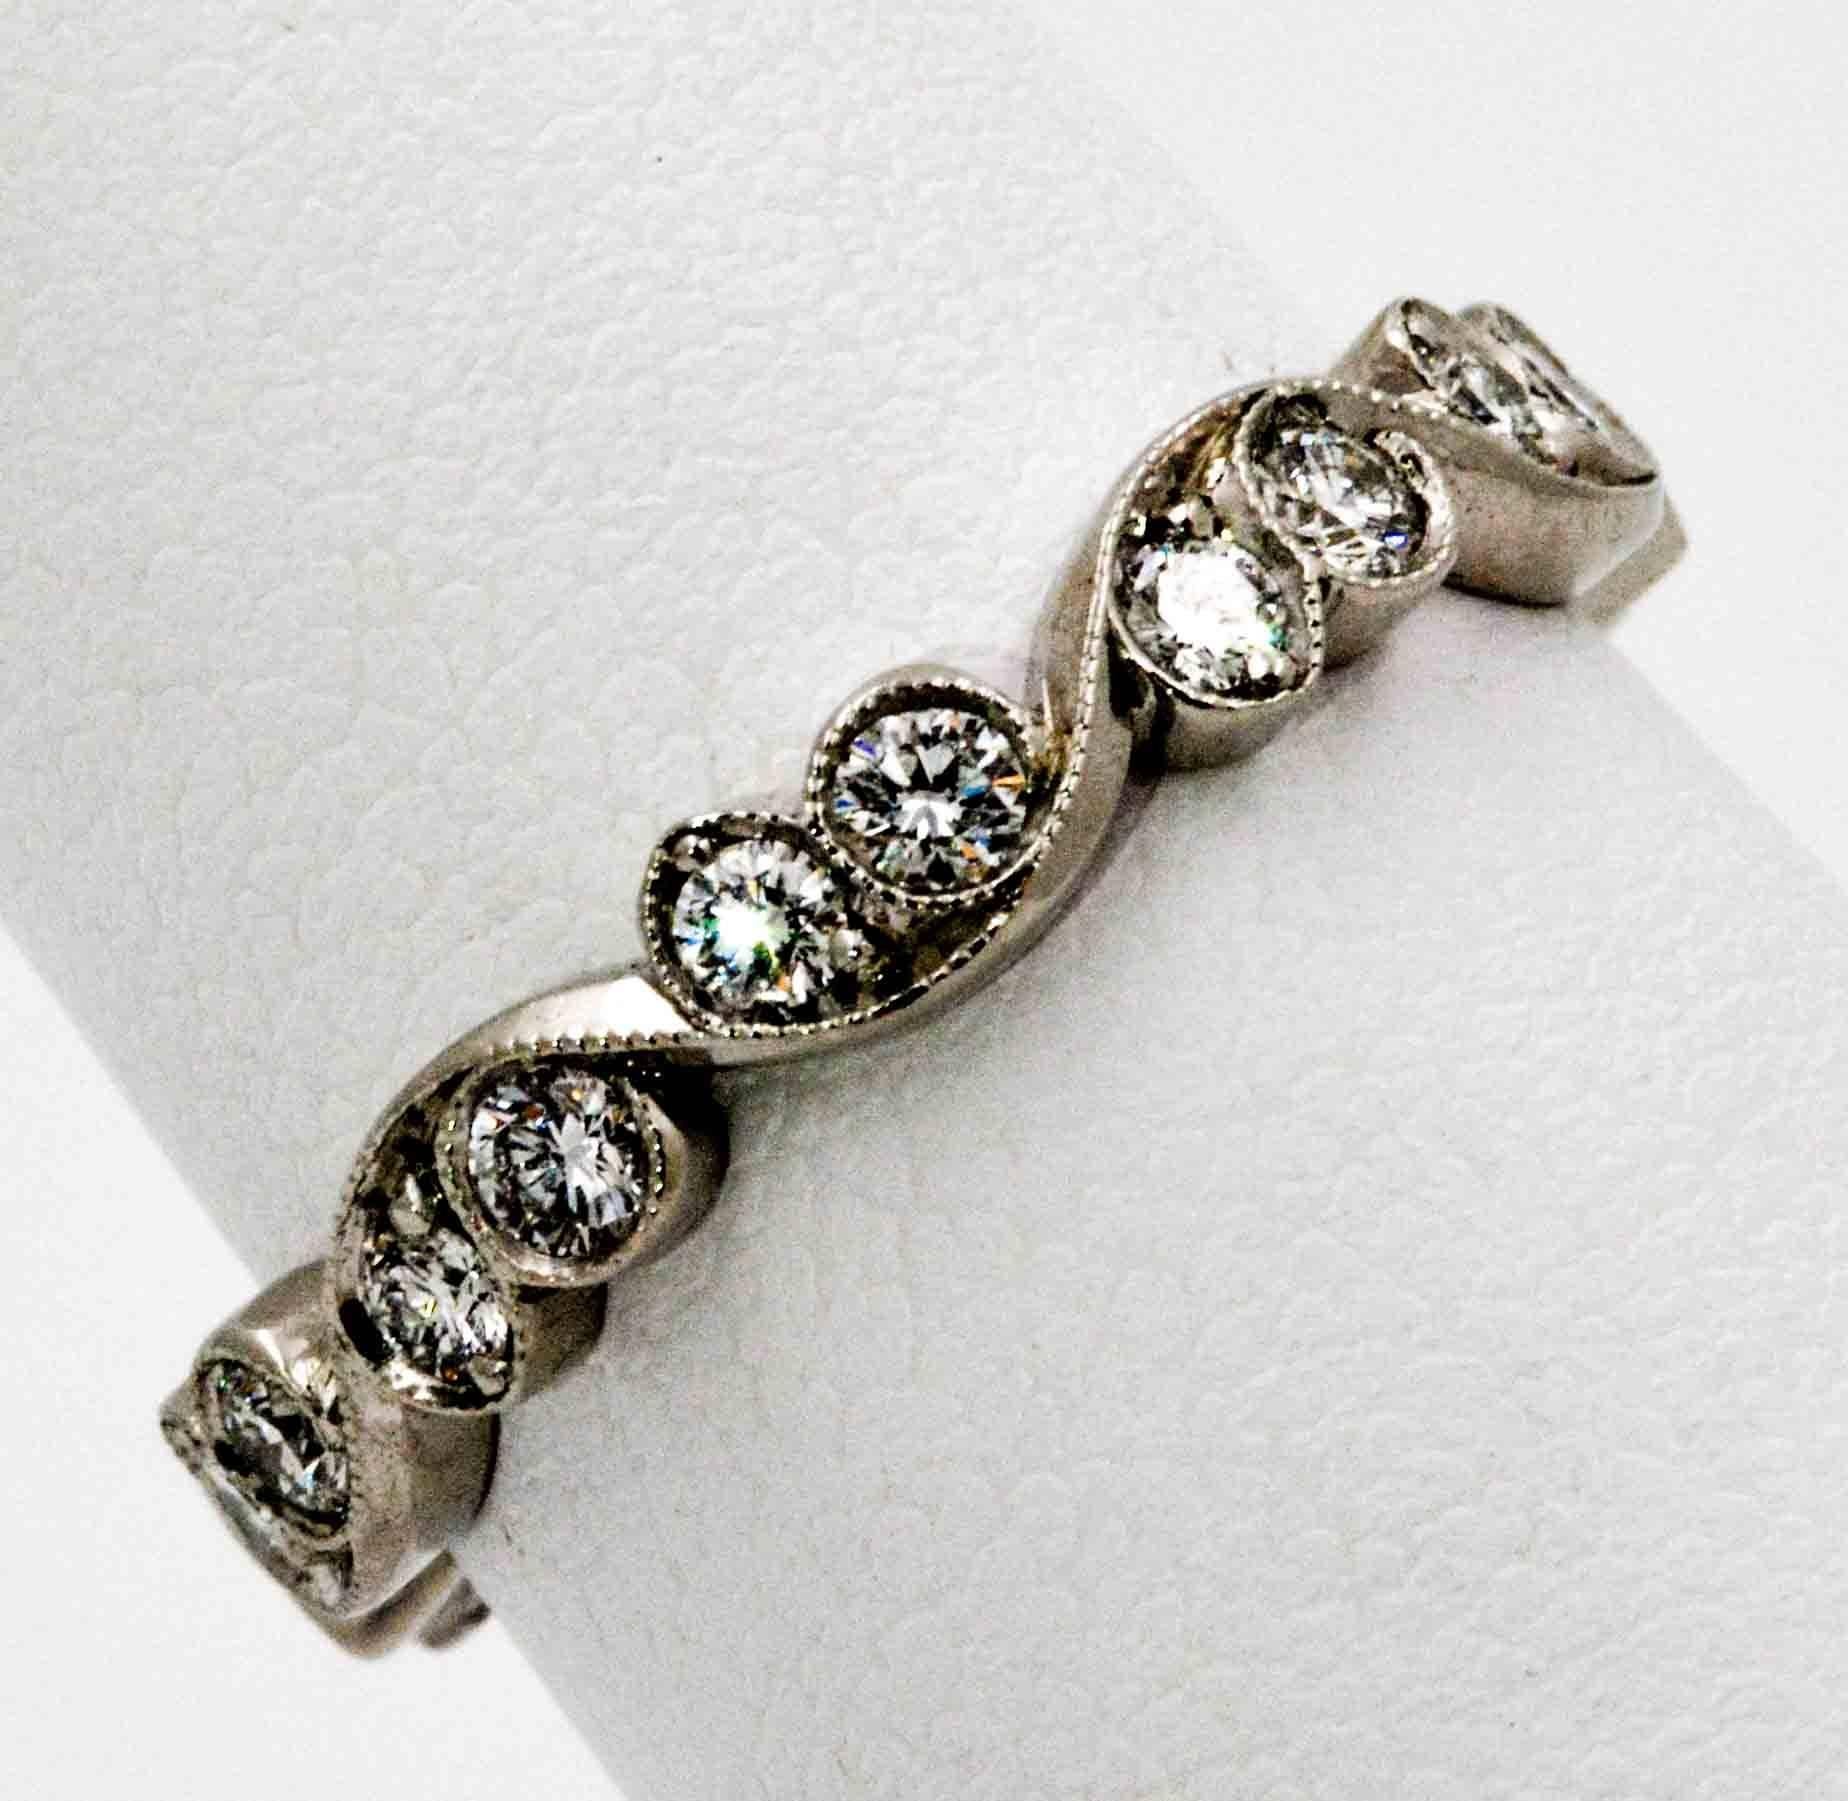  This handcrafted platinum eternity band is simply elegant as it loops and swirls around the finger with 20 round brilliant cut diamonds weighing 0.65 CTW. This irresistible ring fits finger size 5.25, and has far surpassed the Eiseman Jewels